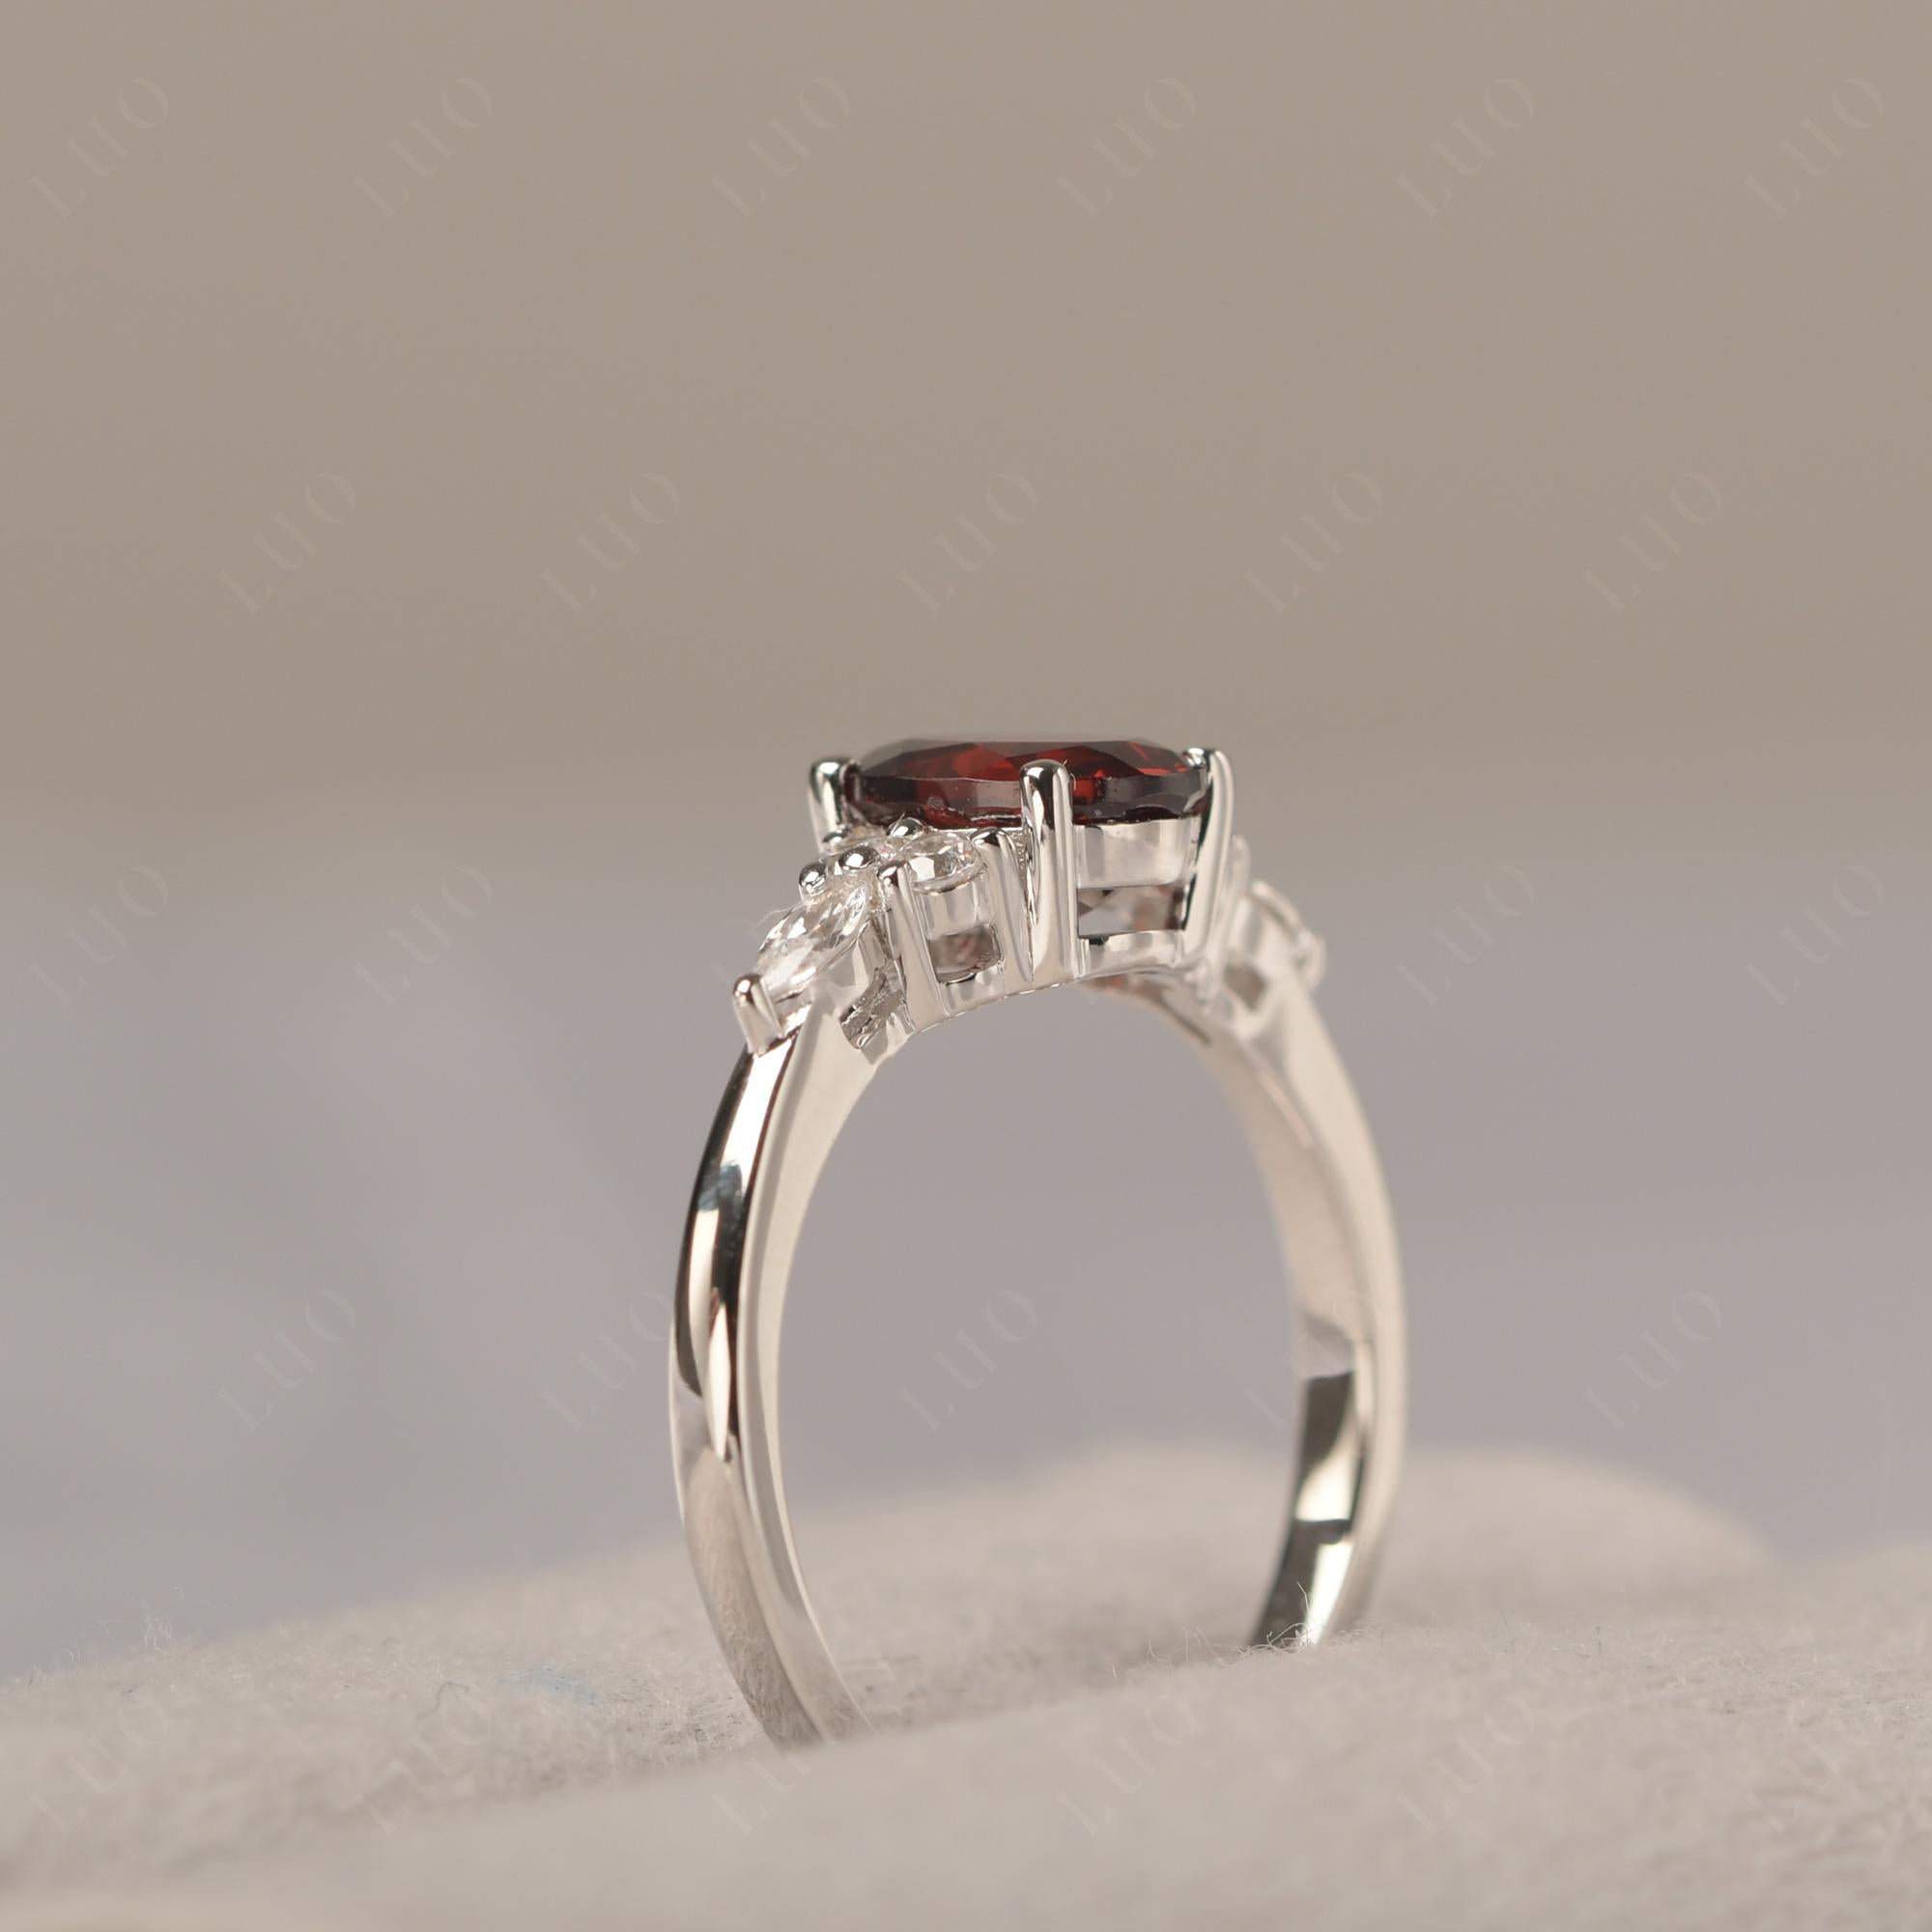 Simple Oval Garnet Engagement Ring - LUO Jewelry